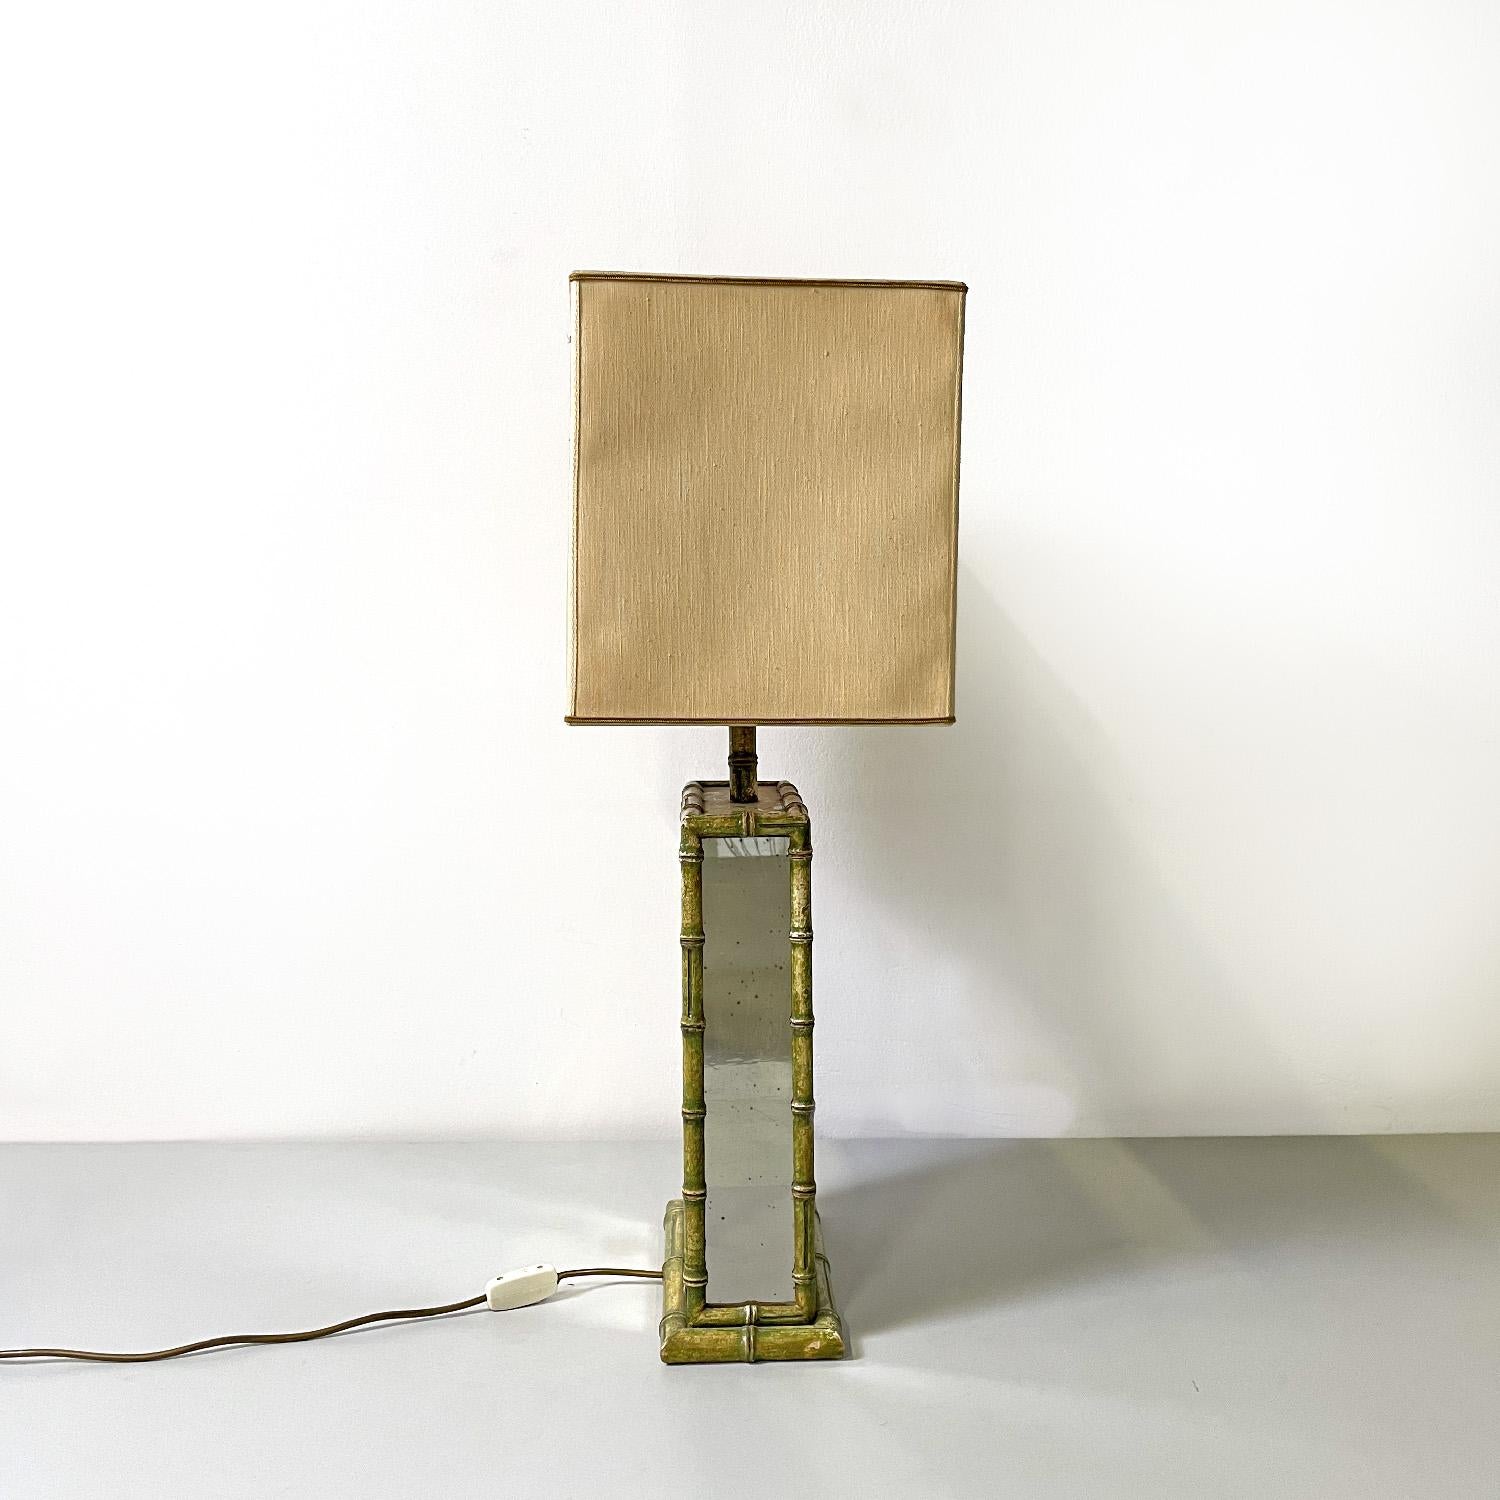 Metal Italian modern table lamp with mirrors and floral decorations, 1970s